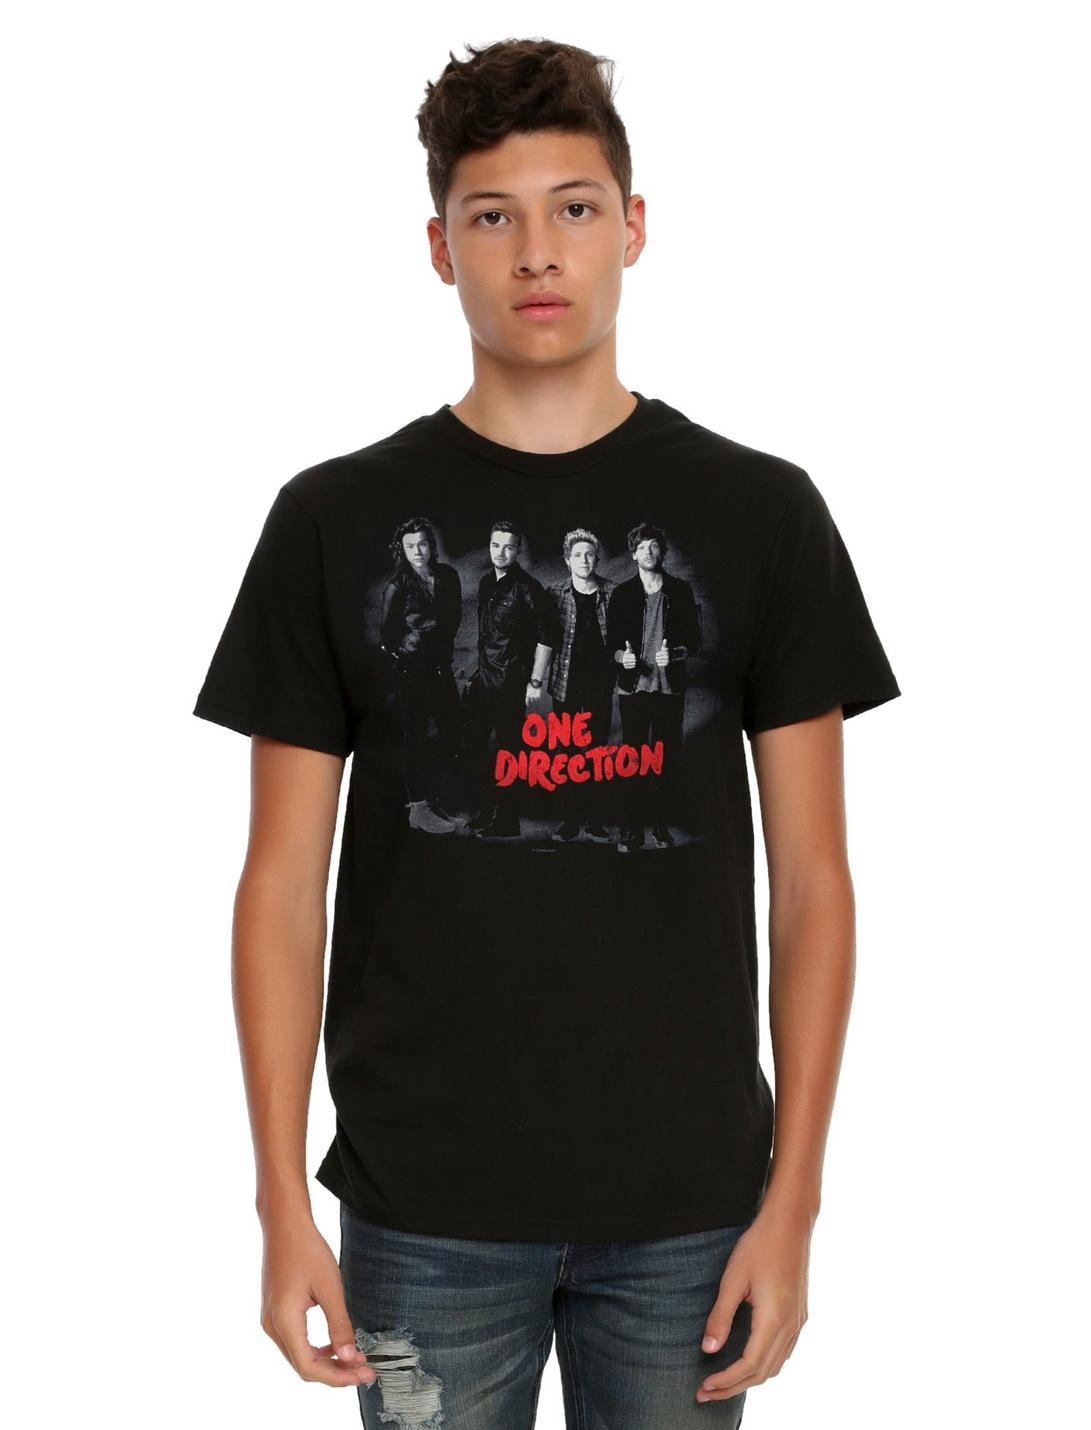 One Direction Group Photo T-Shirt | Hot Topic